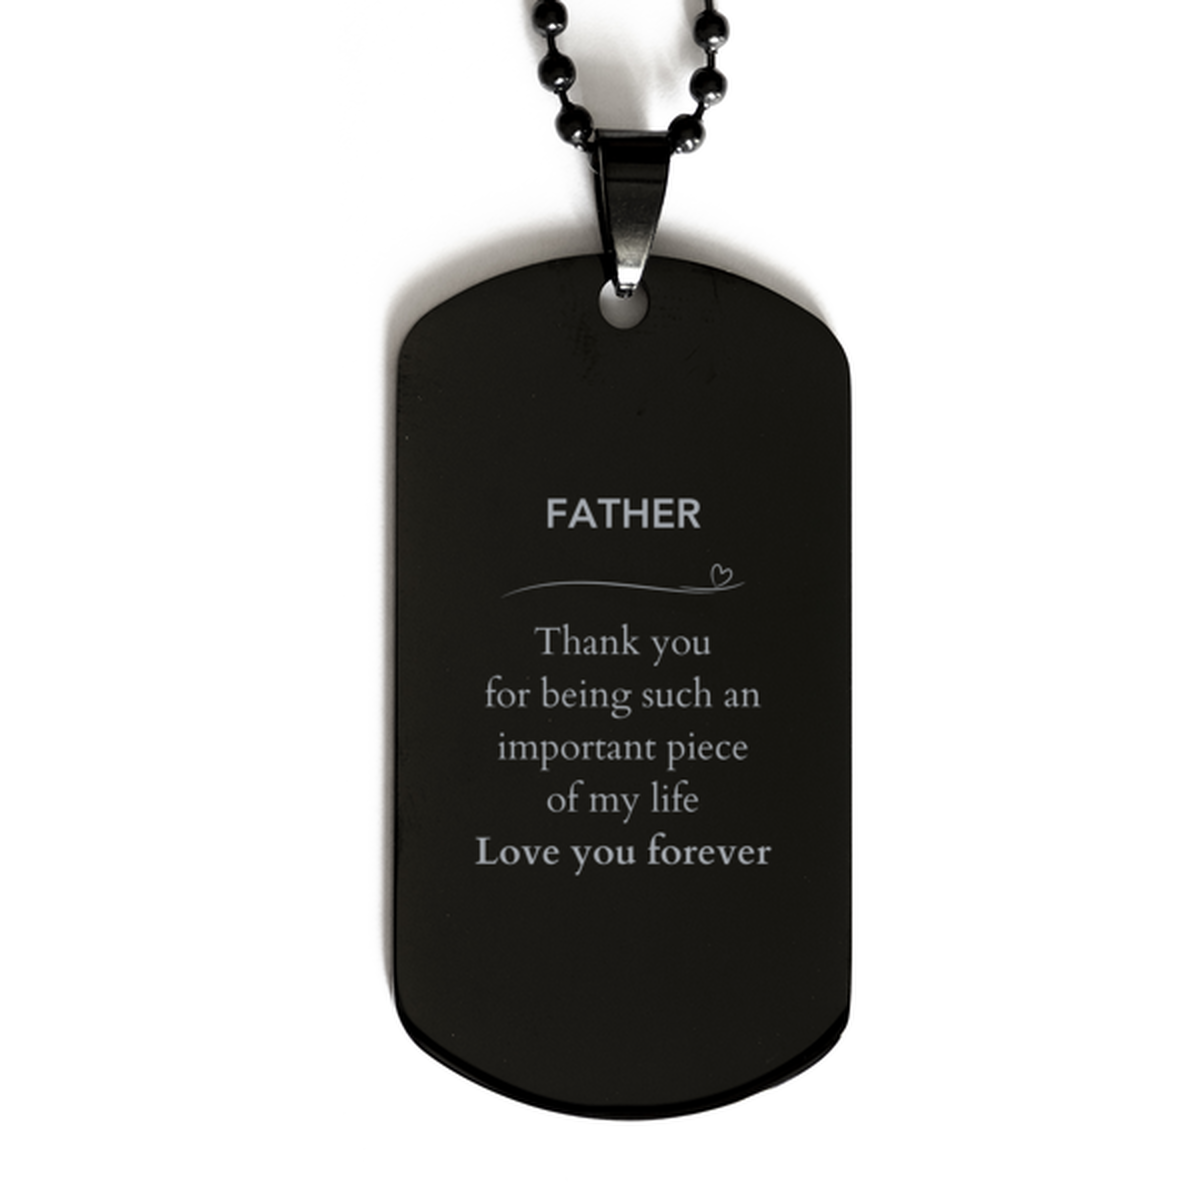 Appropriate Father Black Dog Tag Epic Birthday Gifts for Father Thank you for being such an important piece of my life Father Christmas Mothers Fathers Day